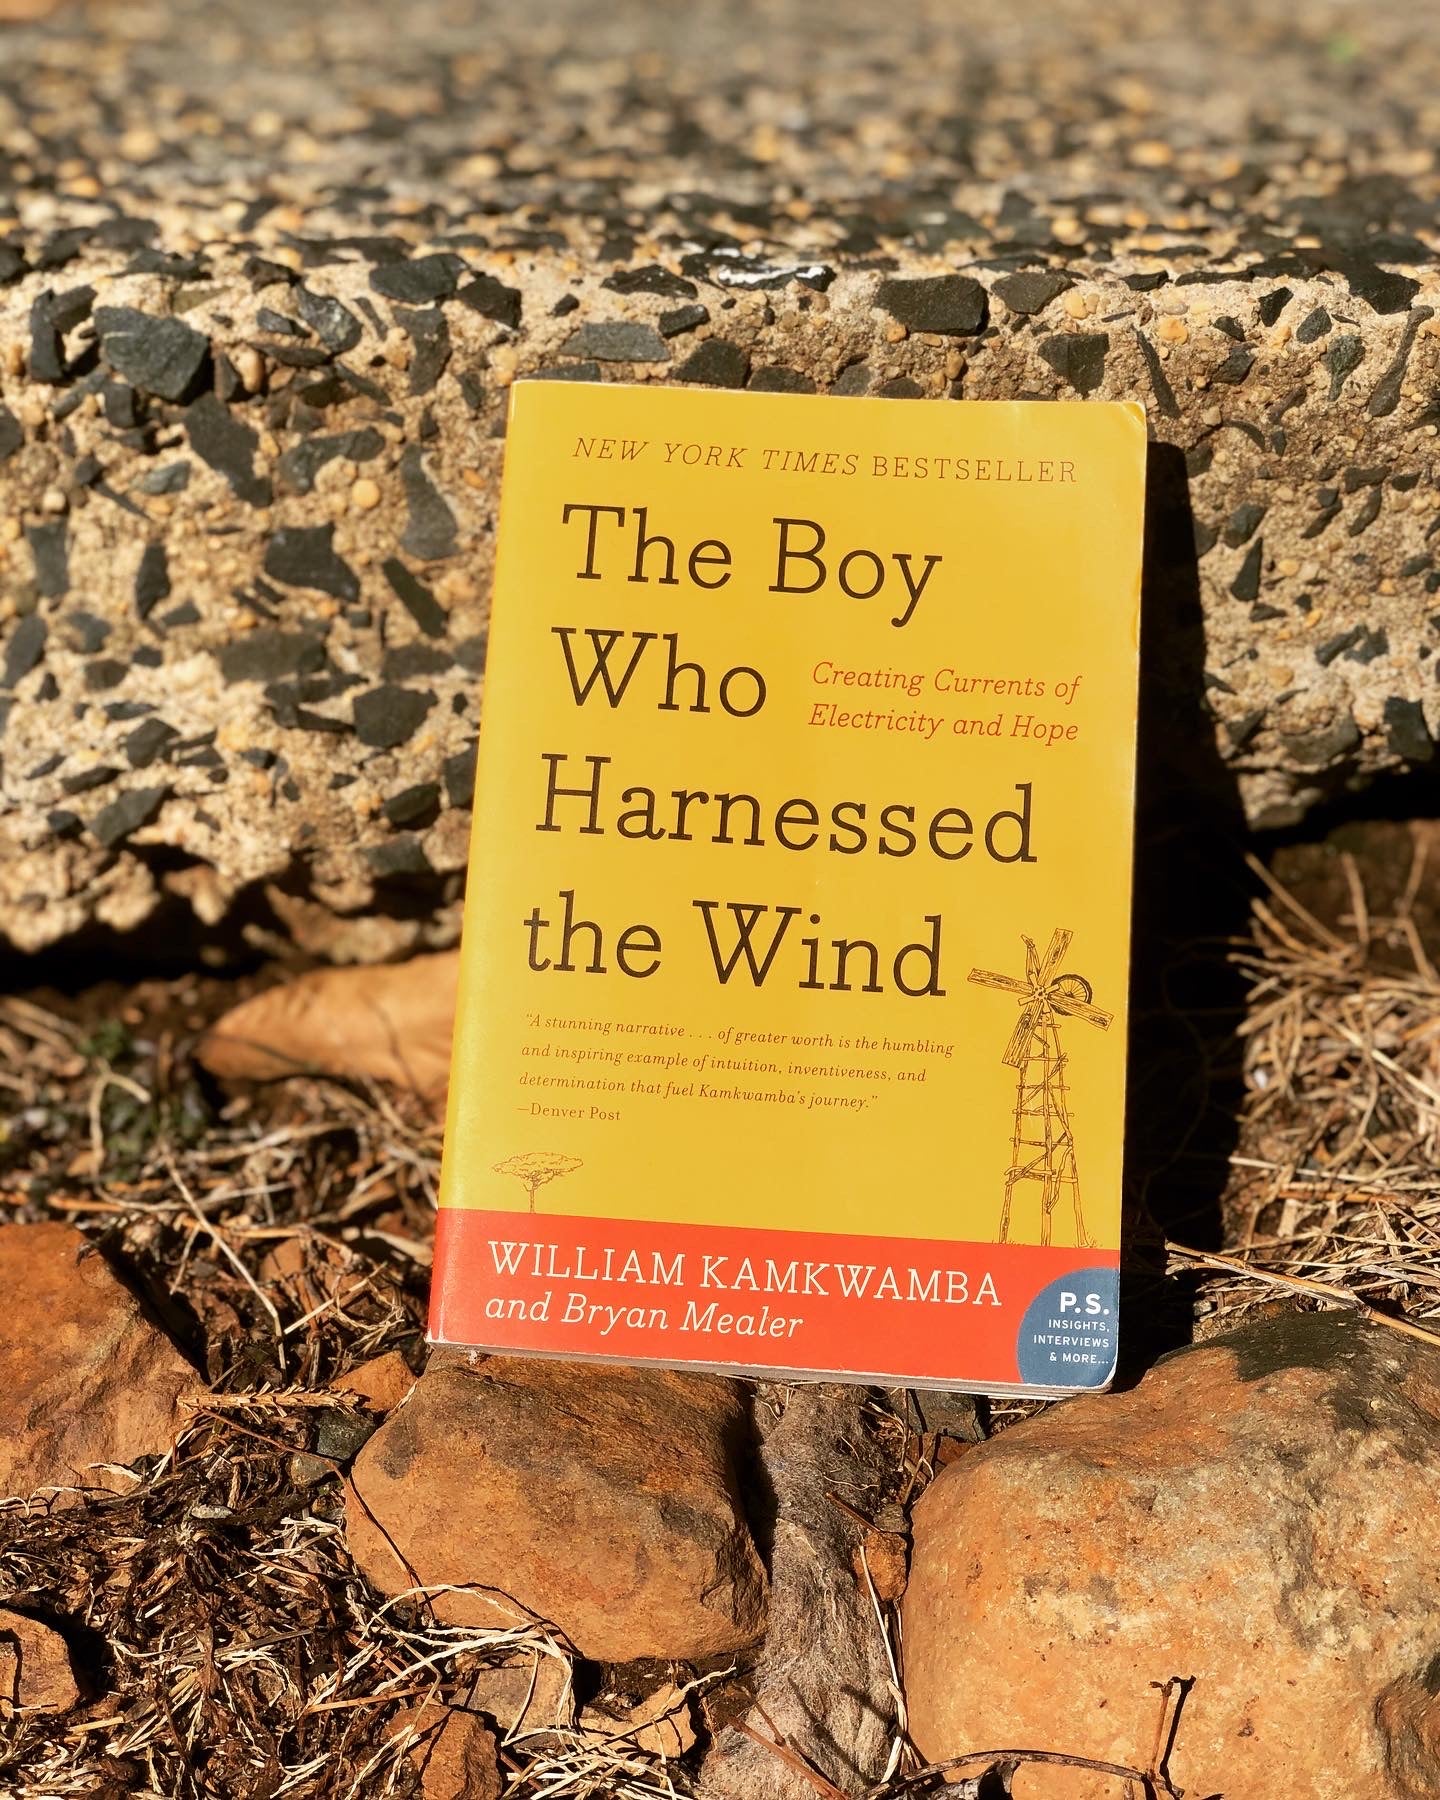 Kamkwamba　Boy　William　by　The　Wind-　the　Harnessed　Who　Books　–　Spectre